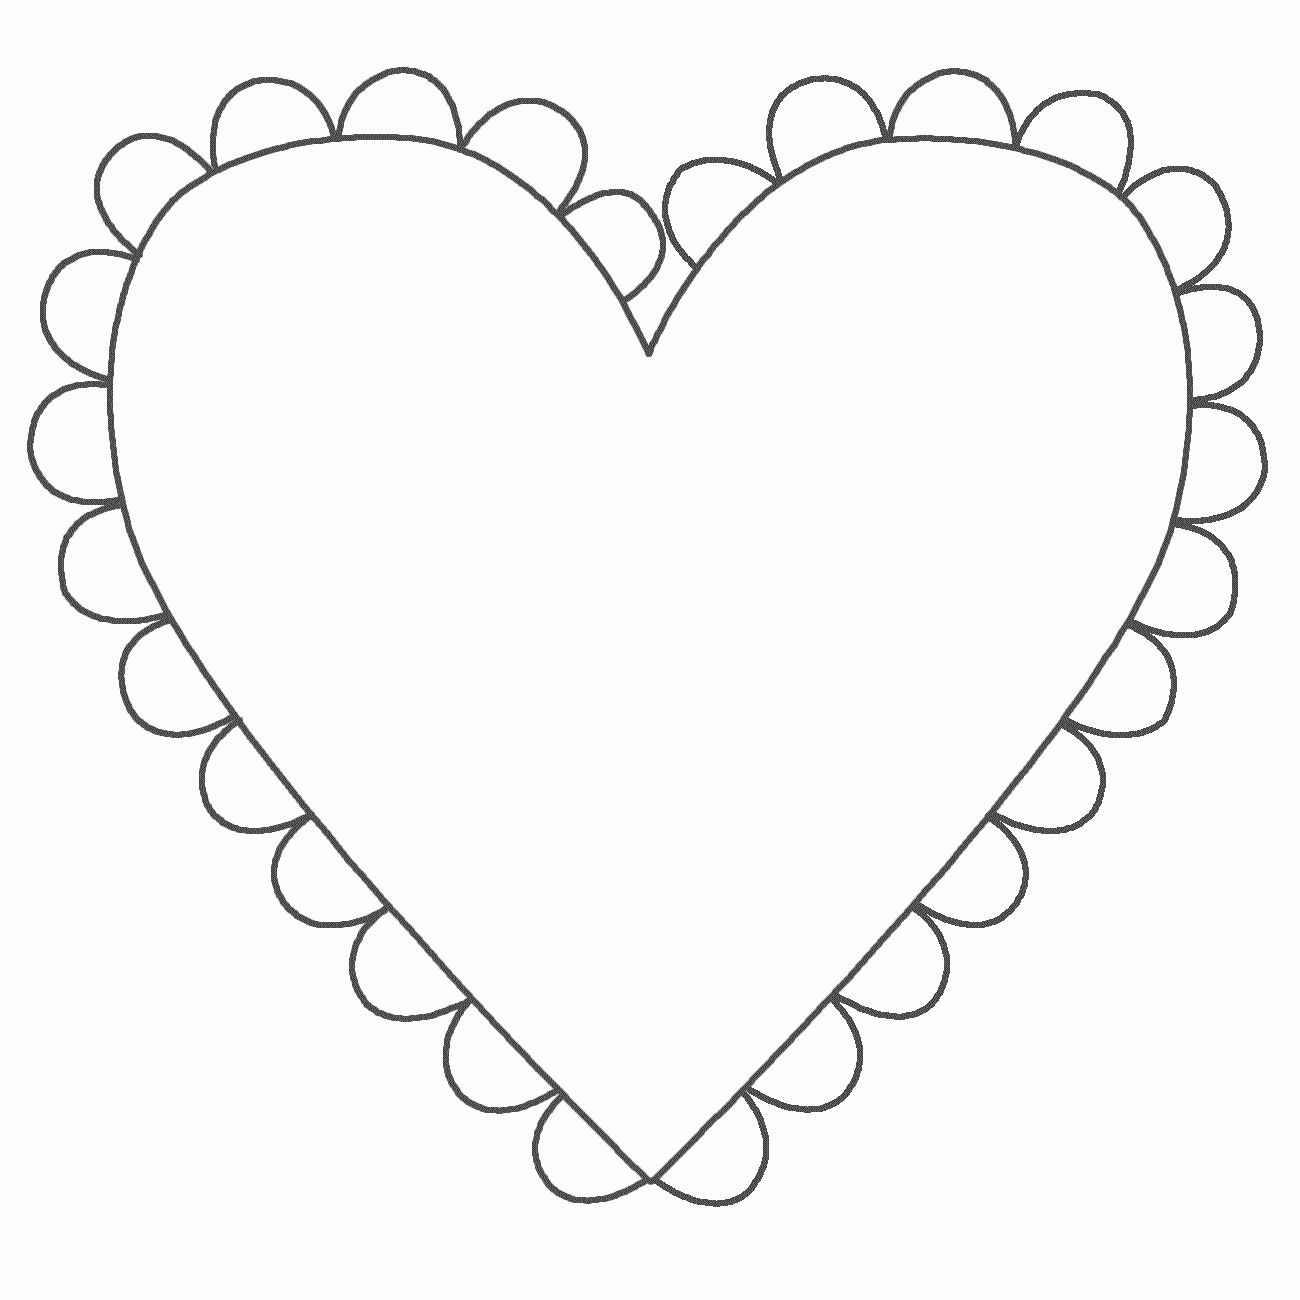 Free Heart Shapes Pictures, Download Free Clip Art, Free Clip Art On - Free Printables Of Hearts